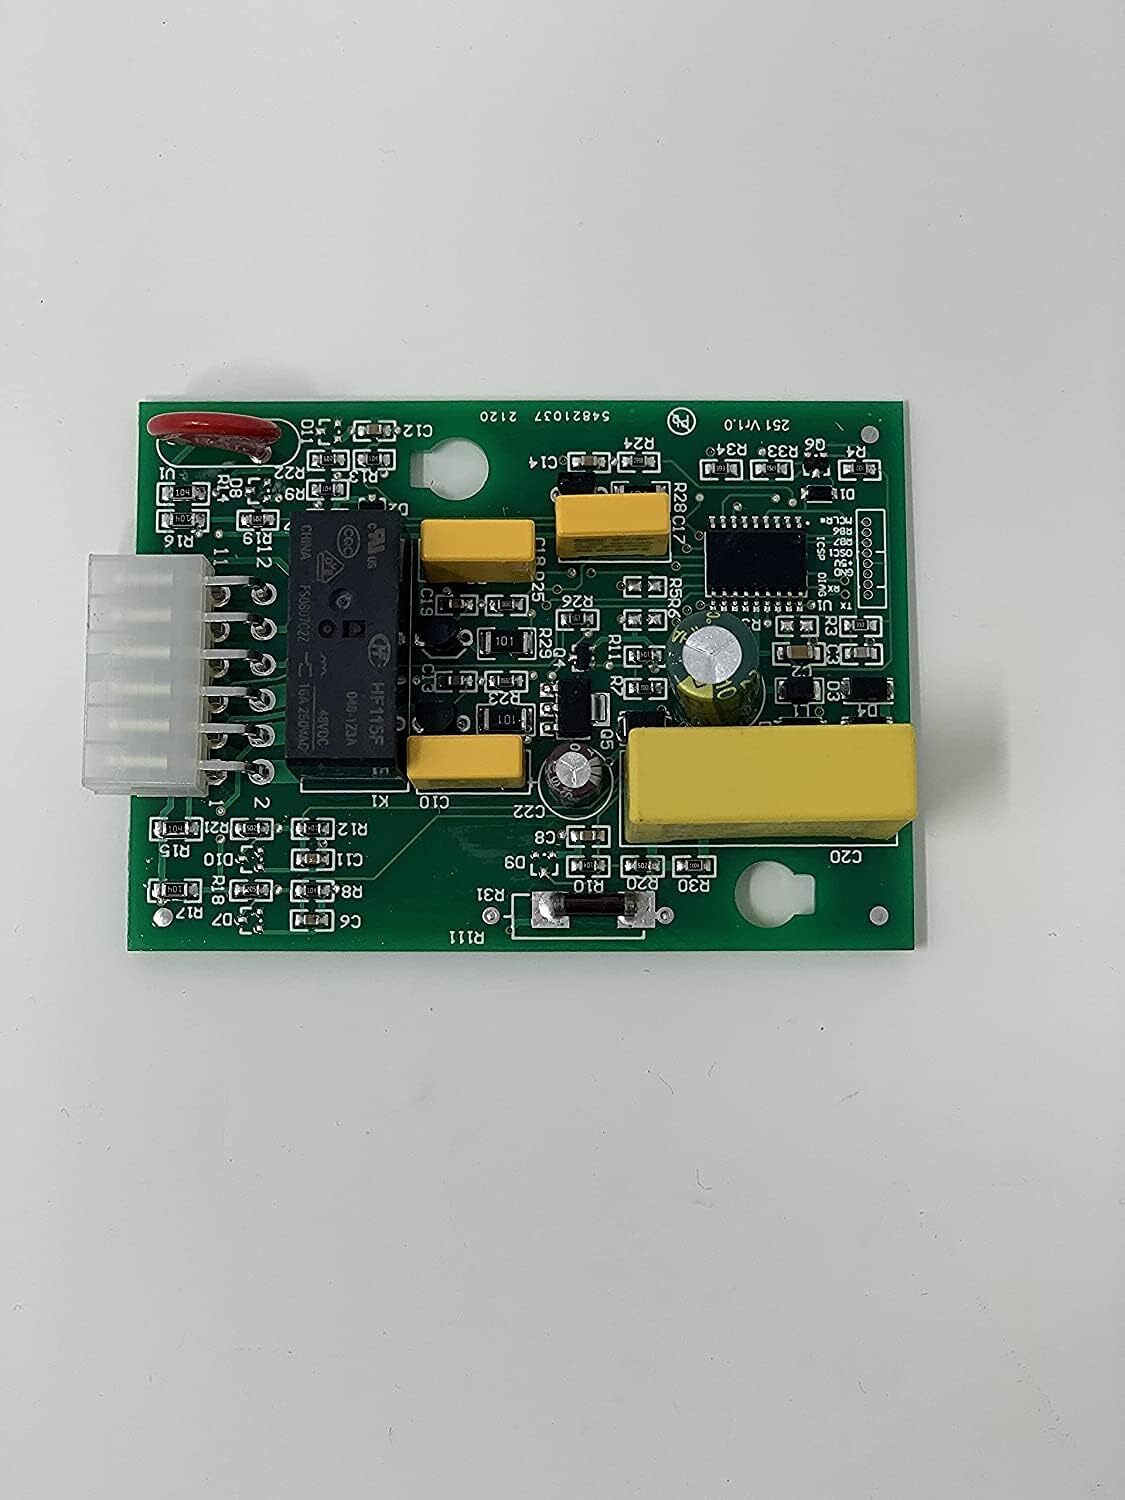 Adaptive Defrost Control Board for Frigidaire FRS23F5AW7 Refrigerator